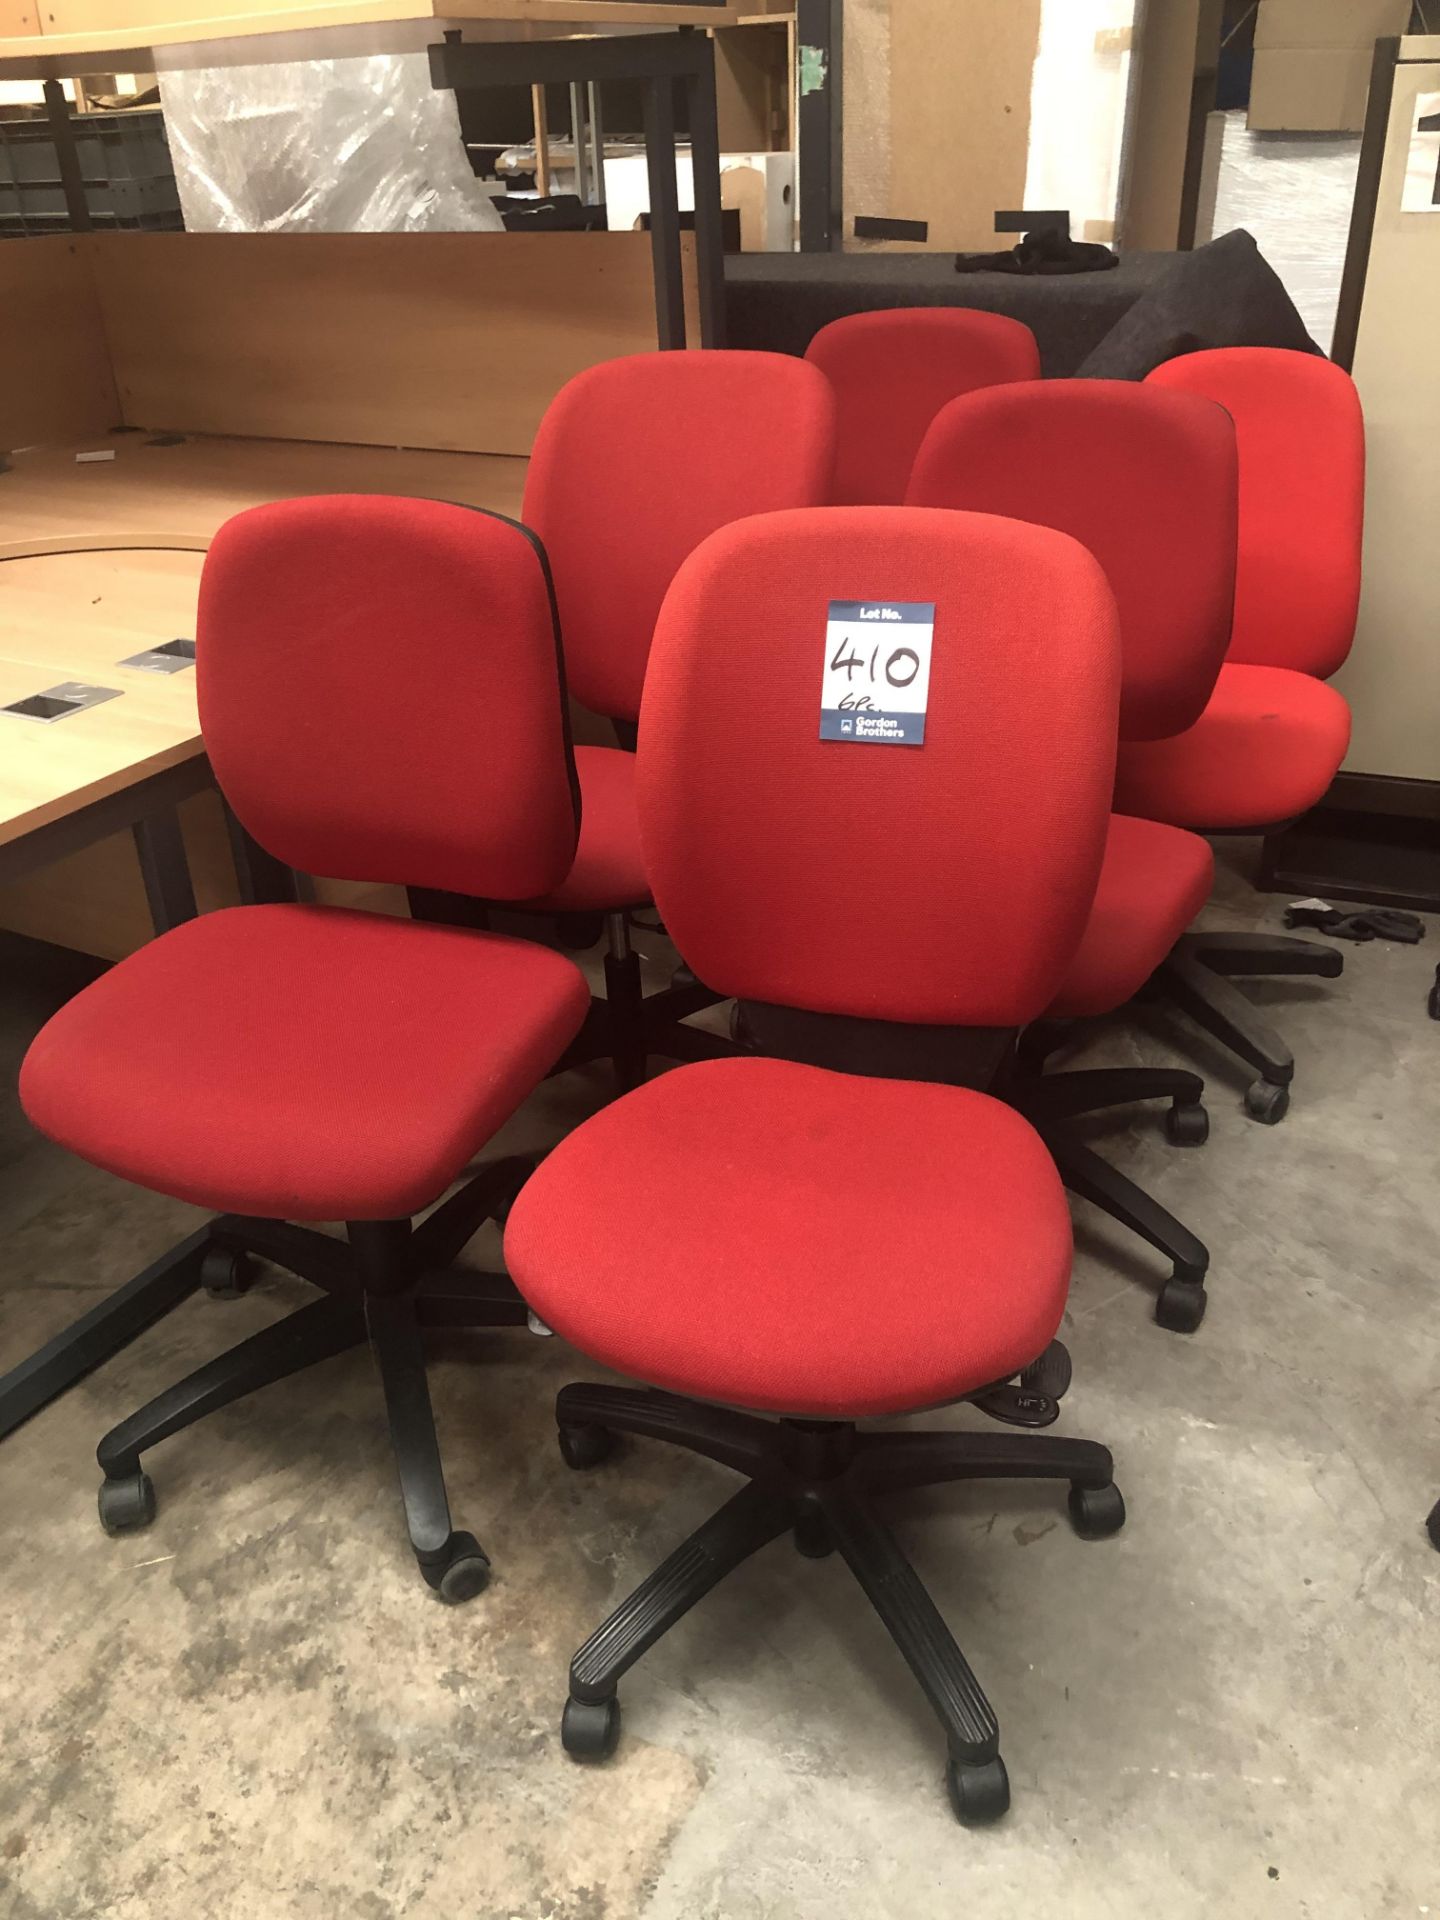 6 x red cloth upholstered operator chairs